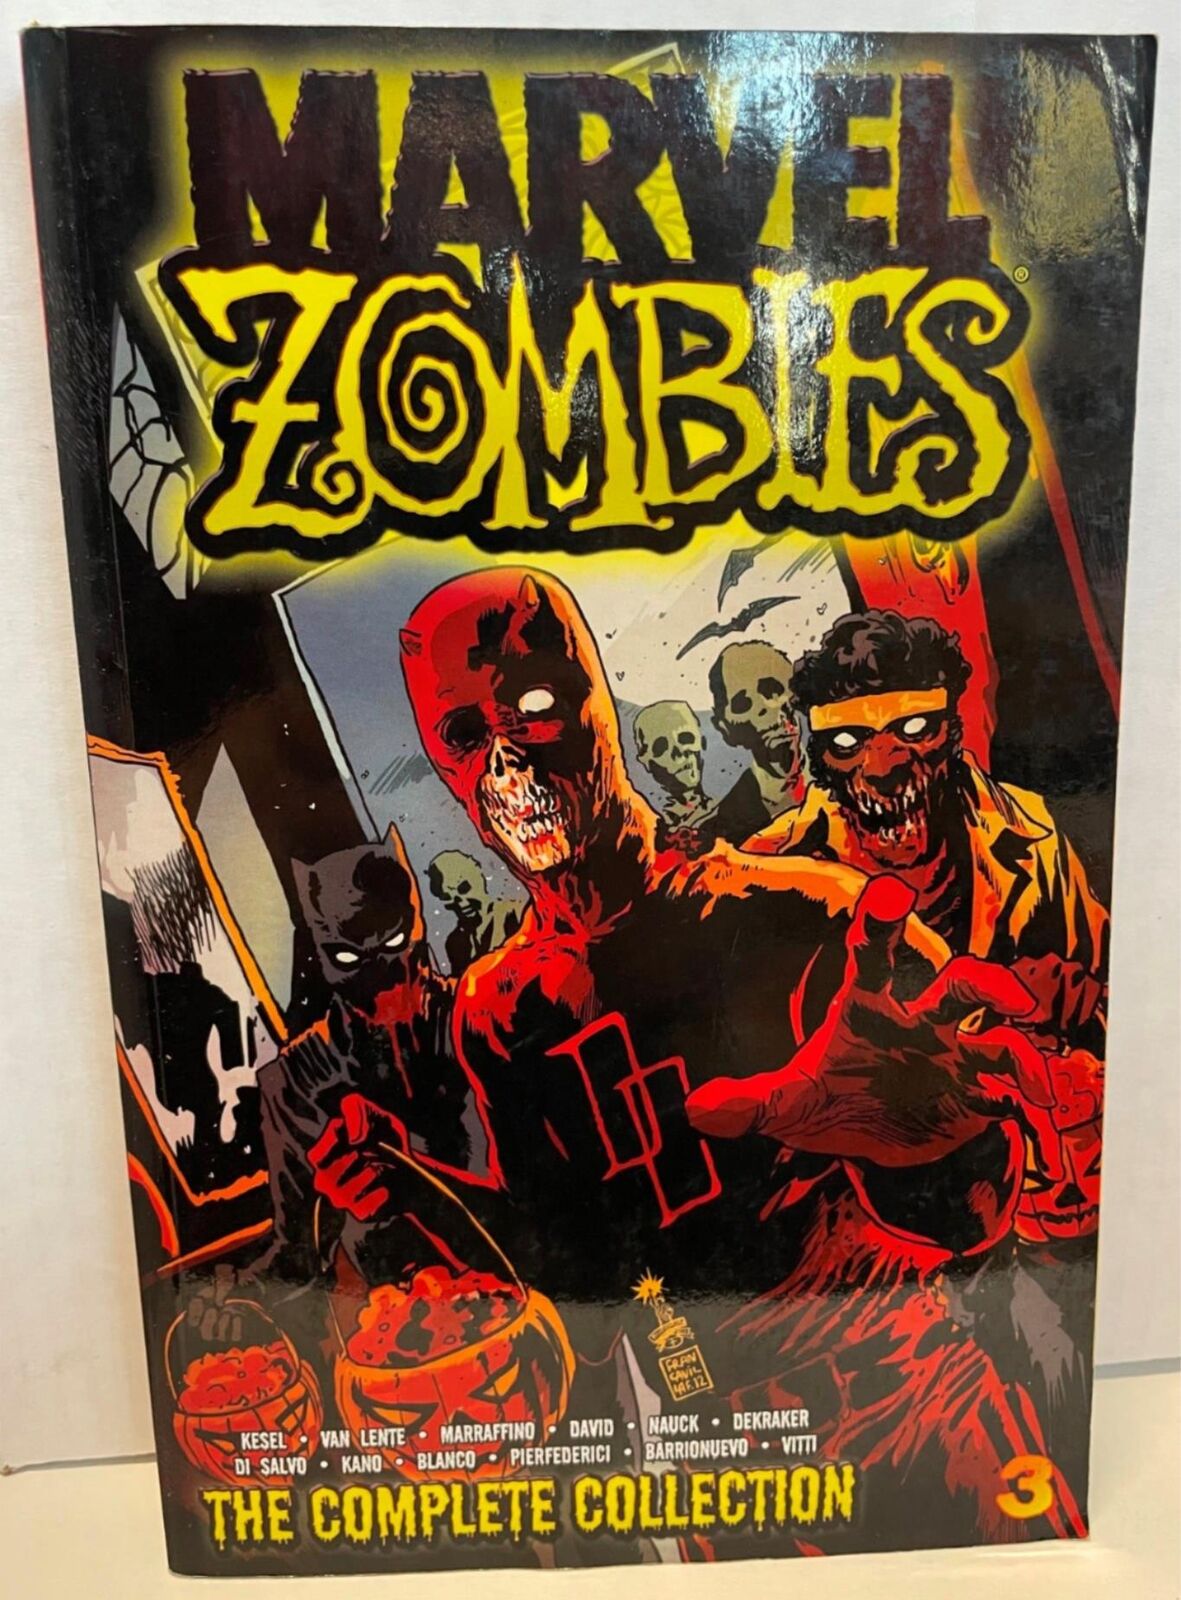 MARVEL ZOMBIES COMPLETE COLLECTION VOLUME 3 (2014)- OOP HTF GRAPHIC NOVEL